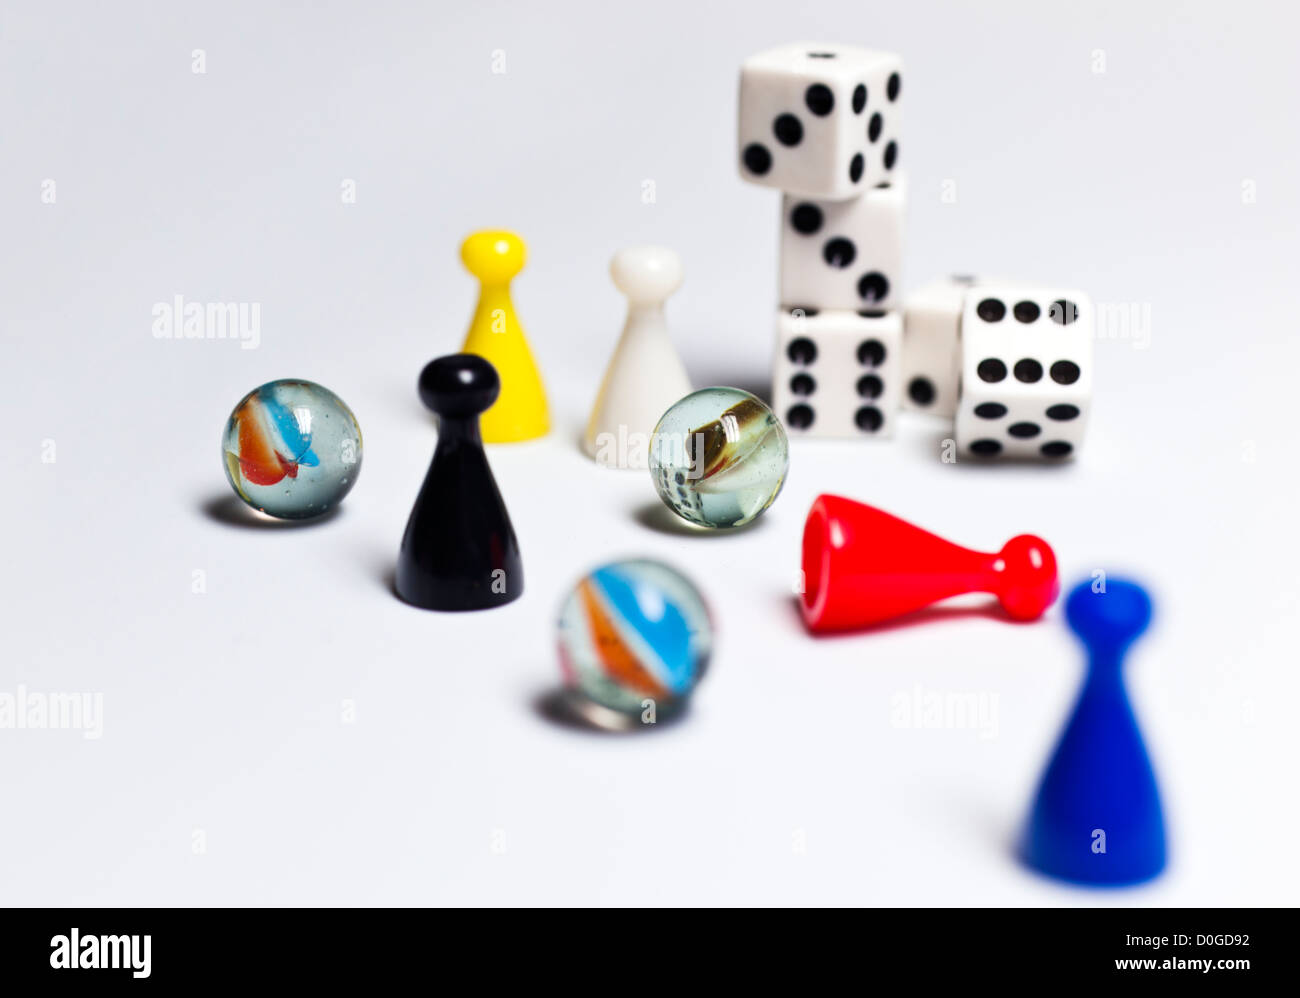 Still life setup of children's toys on table top dominoes dice and game pieces Stock Photo